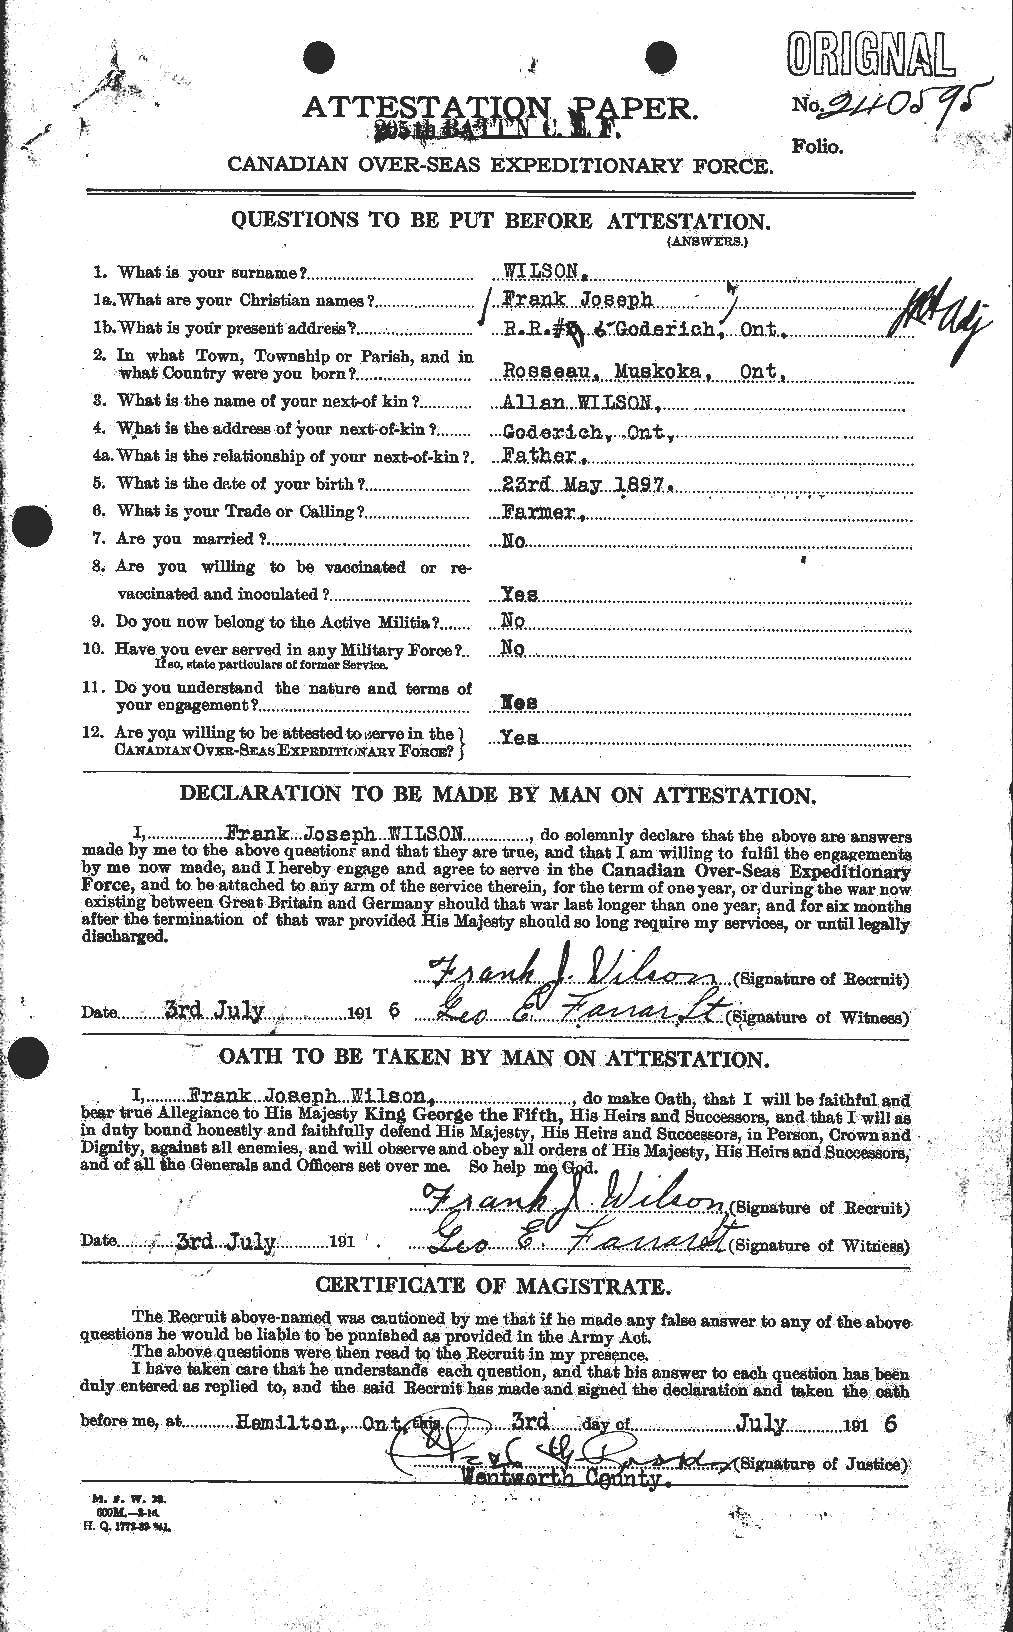 Personnel Records of the First World War - CEF 680678a